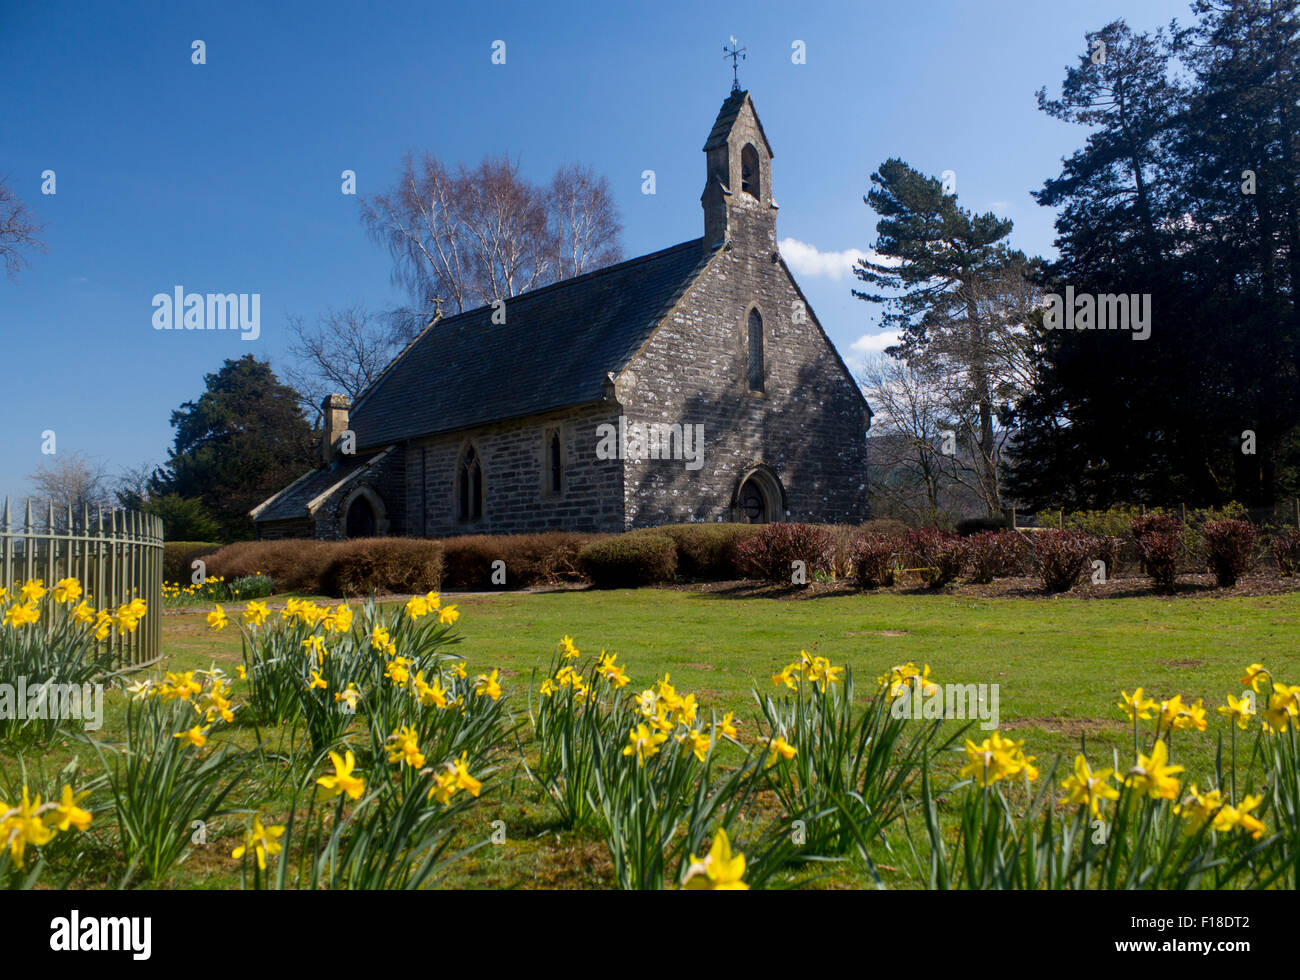 Rug Chapel Capel Rug in spring springtime with daffodils in foreground Near Corwen Denbighshire North East Wales UK Stock Photo